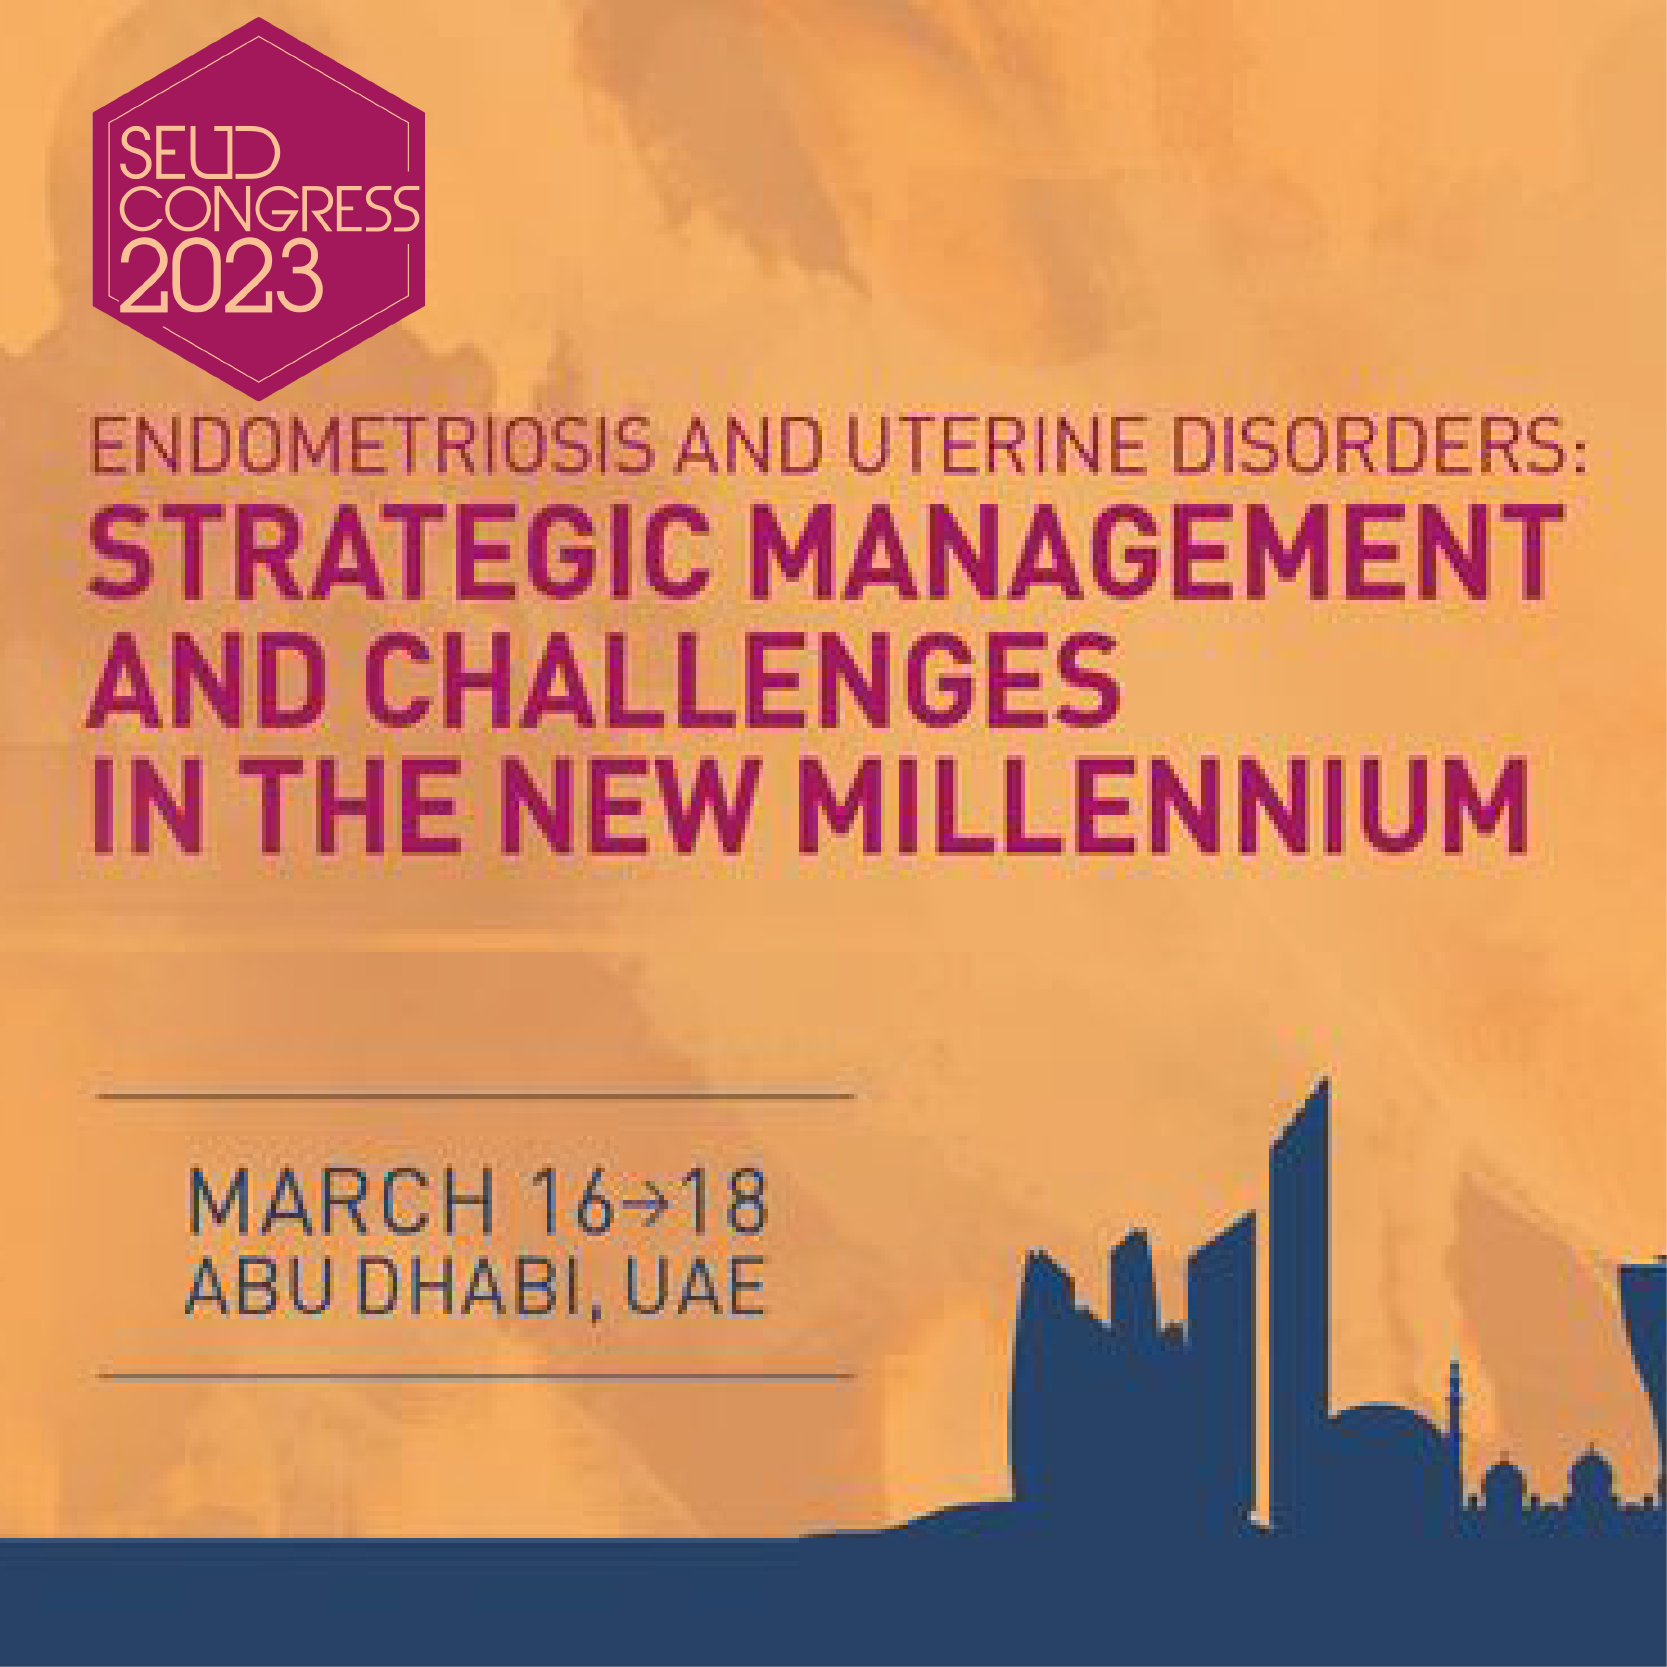 9th Society of Endometriosis and Uterine Disorders Annual Congress - SEUD 2023